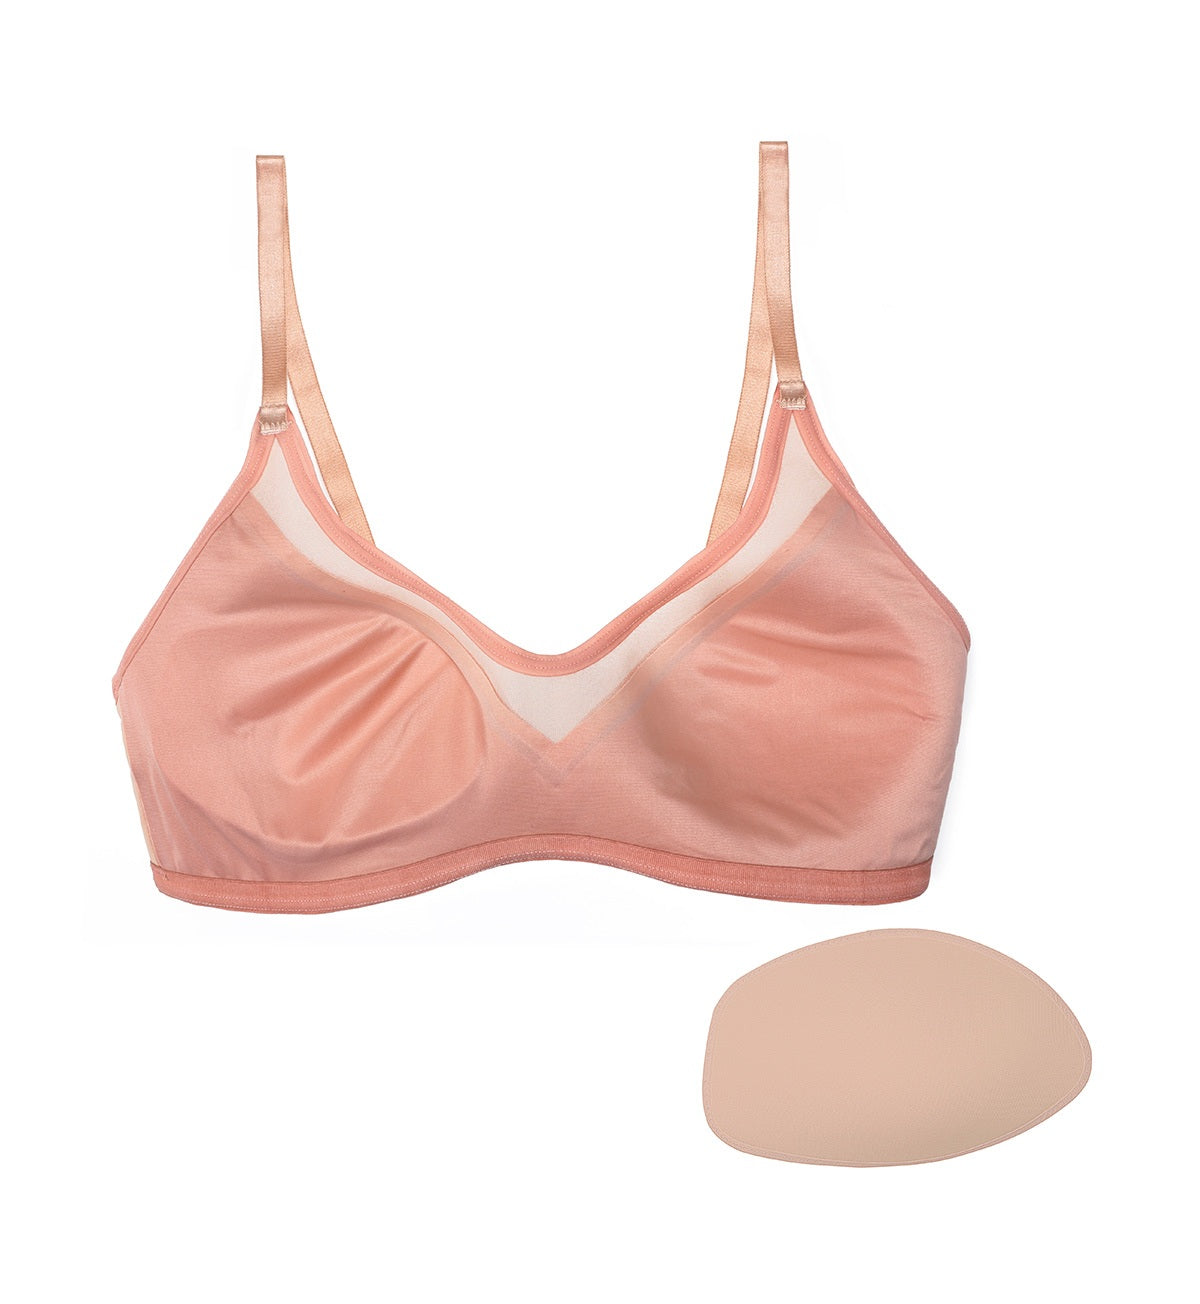 Buy Sloggi Oxygene Infinite Non-Wired Bra from £9.49 (Today) – Best Deals  on